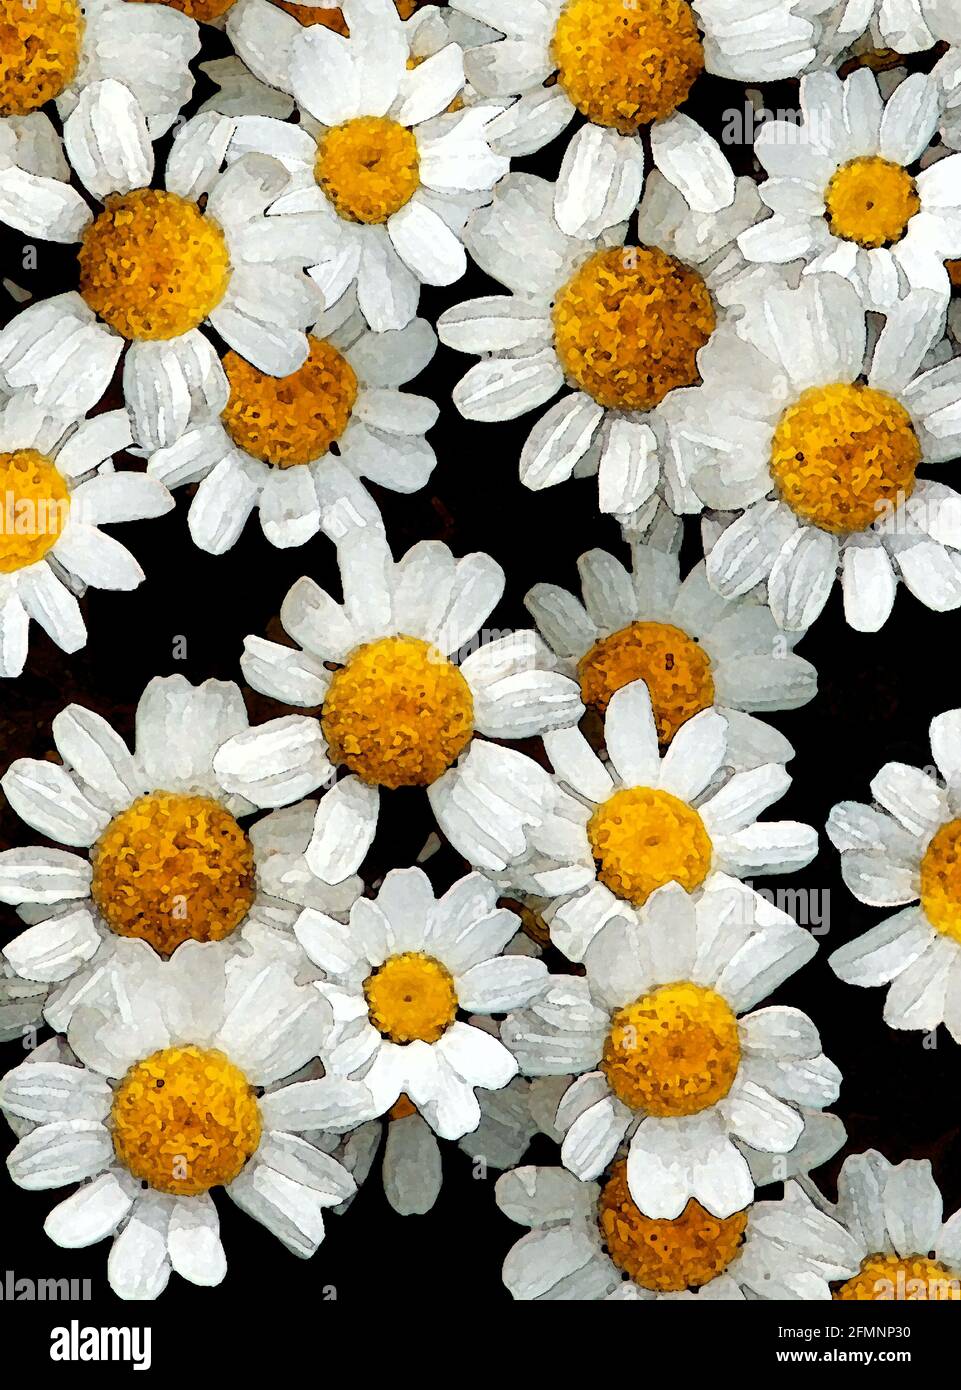 Feverfew (Tanacetum parthenium) One of Forty-two Iconic Images of English Garden Flowers, Wildflowers and Rural Landscapes. Stock Photo